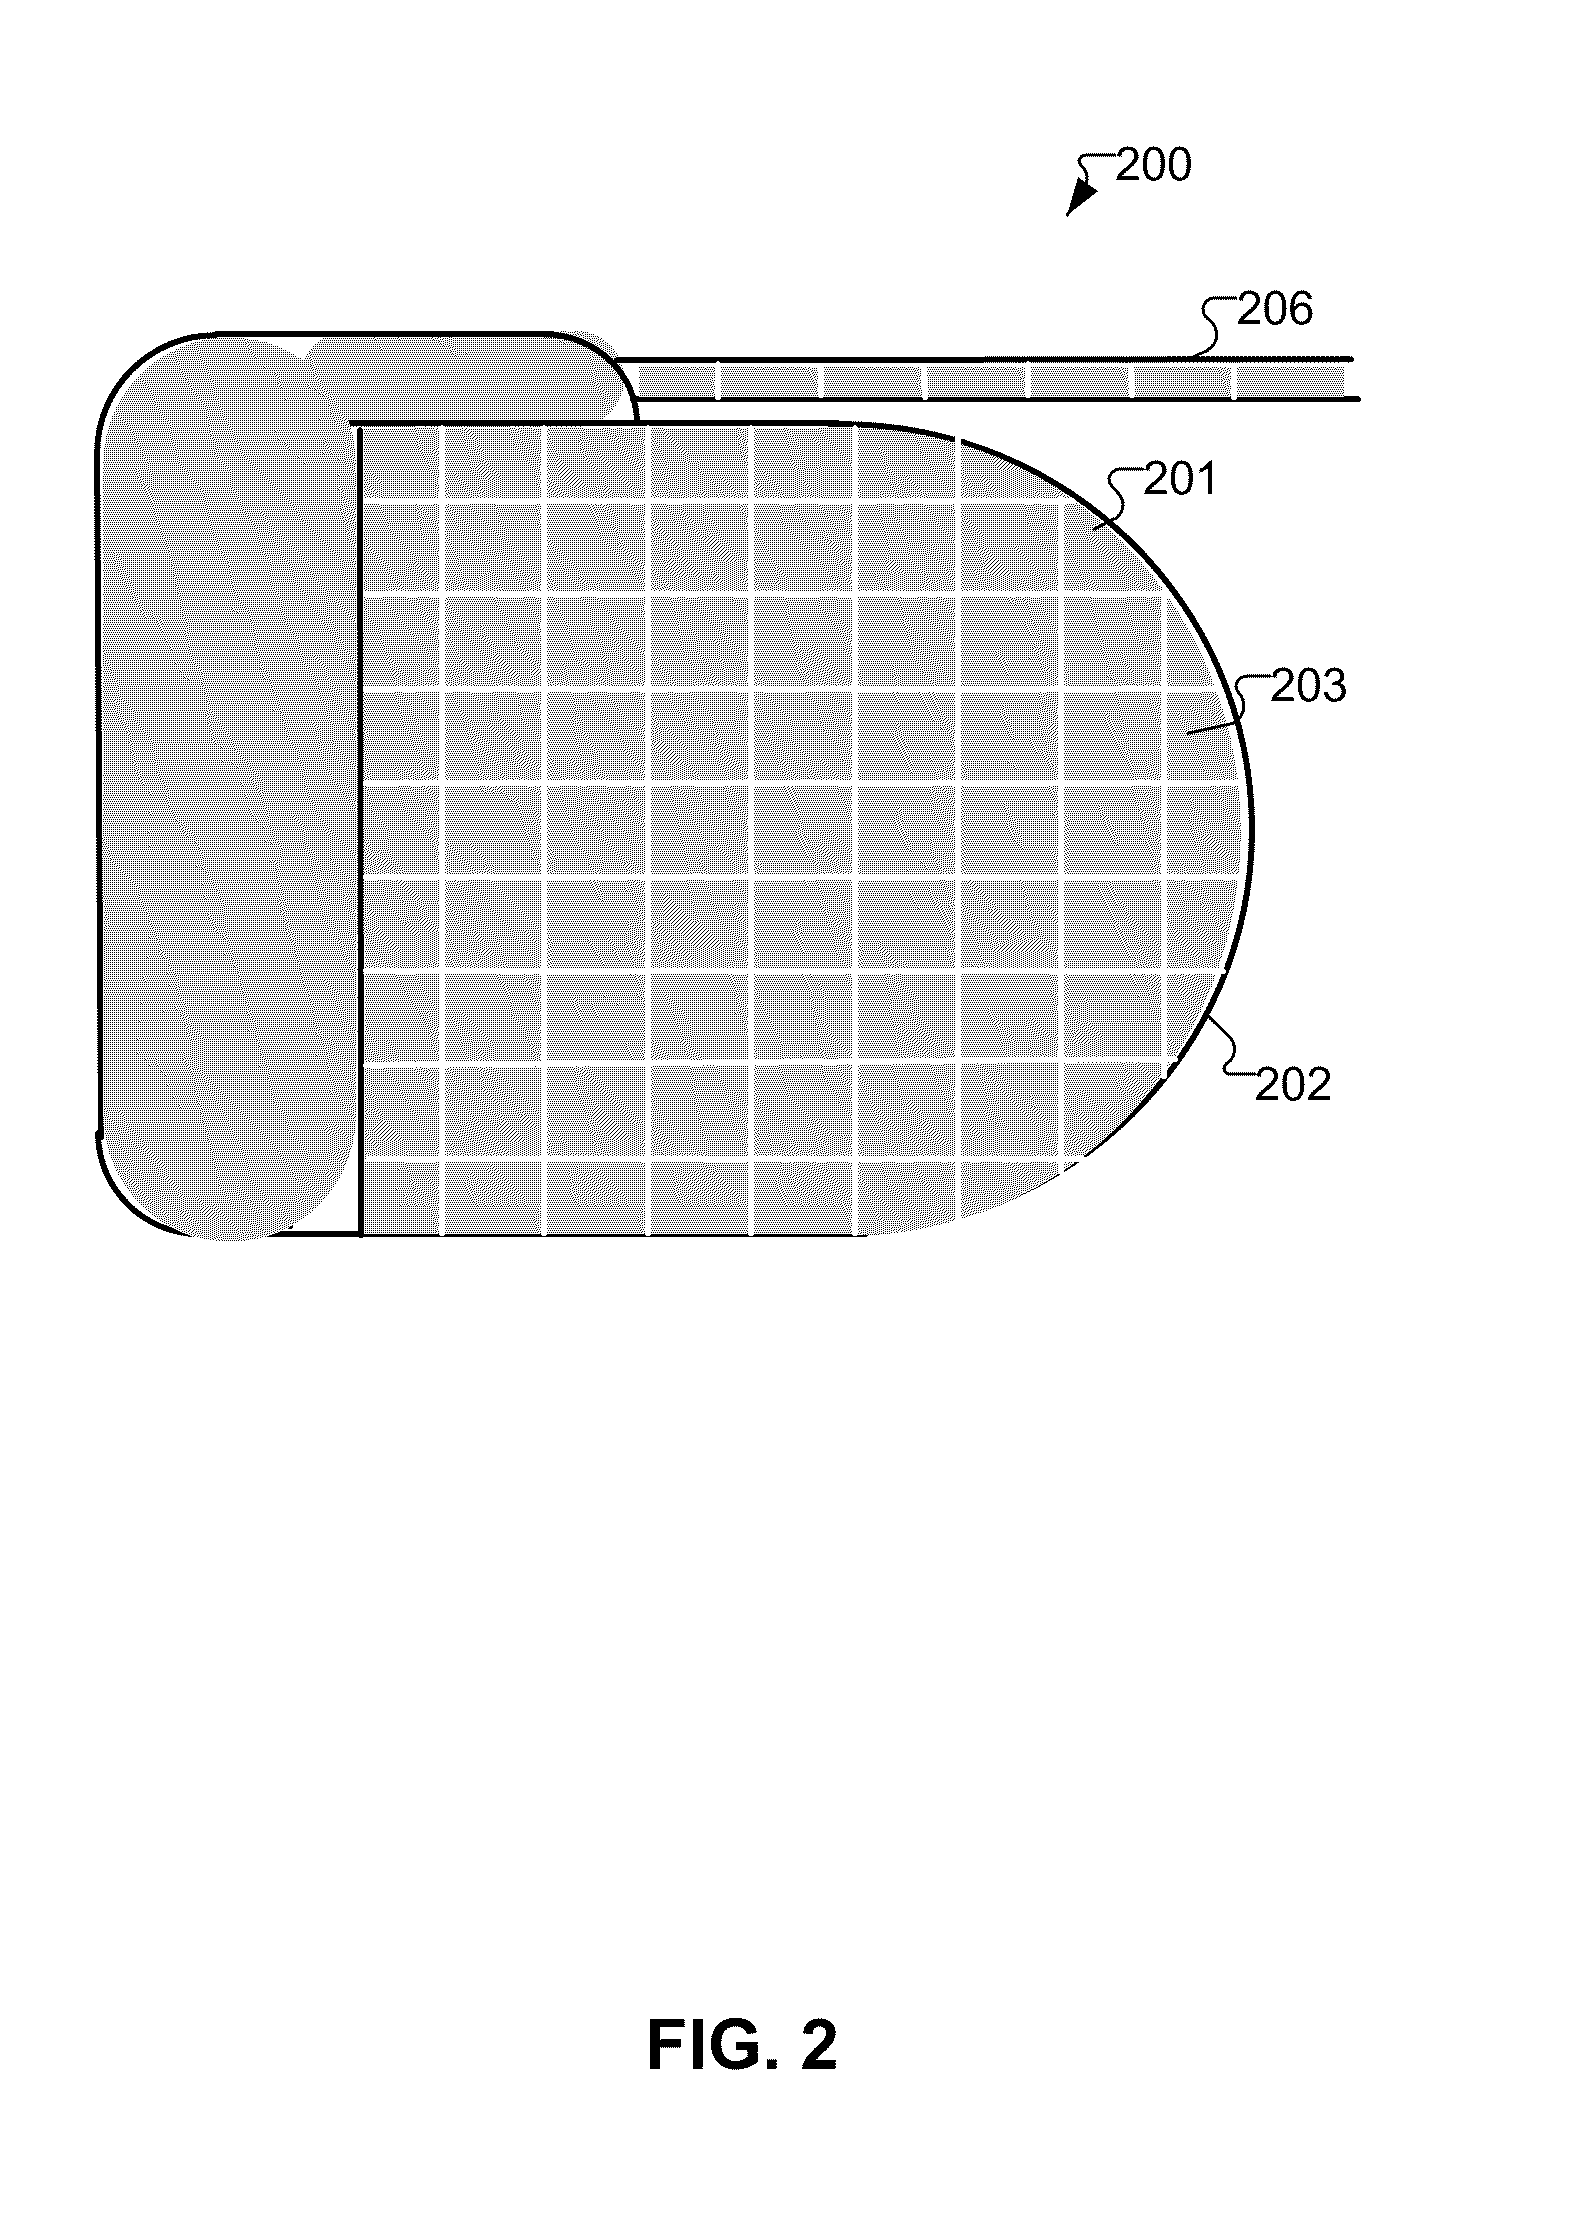 Conductive Coating of Implants with Inductive Link